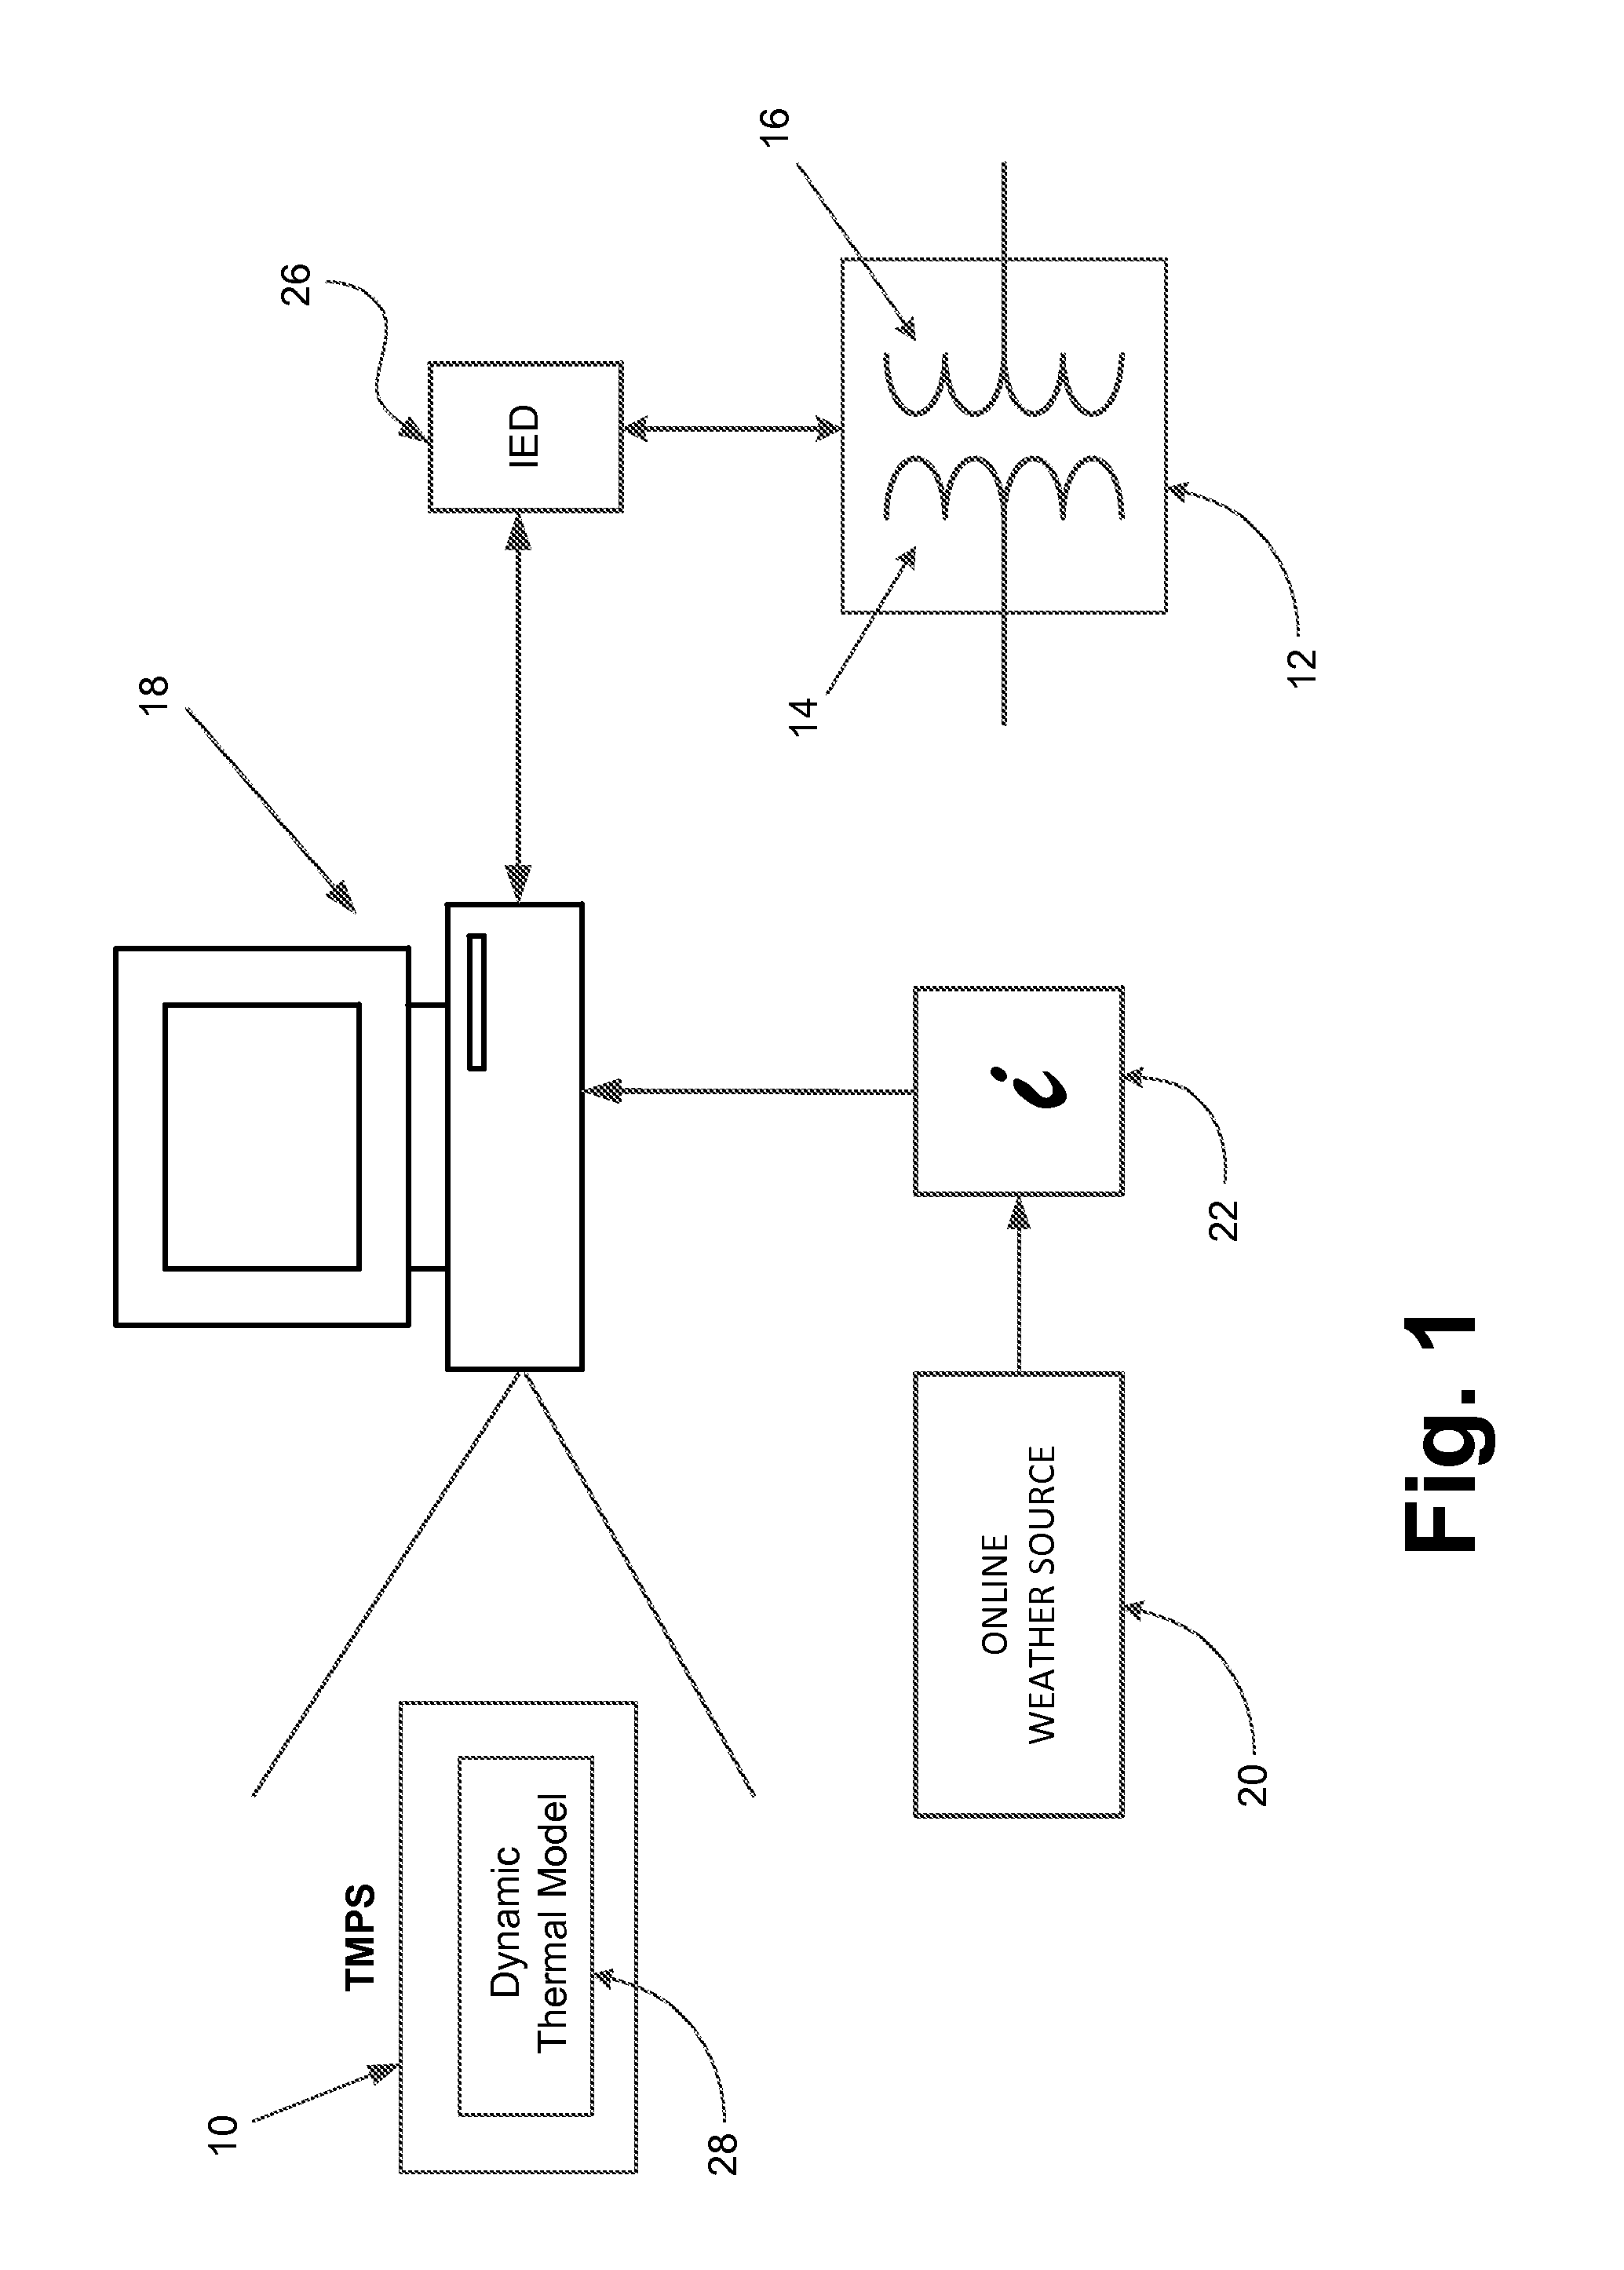 Oil-immersed transformer thermal monitoring and prediction system